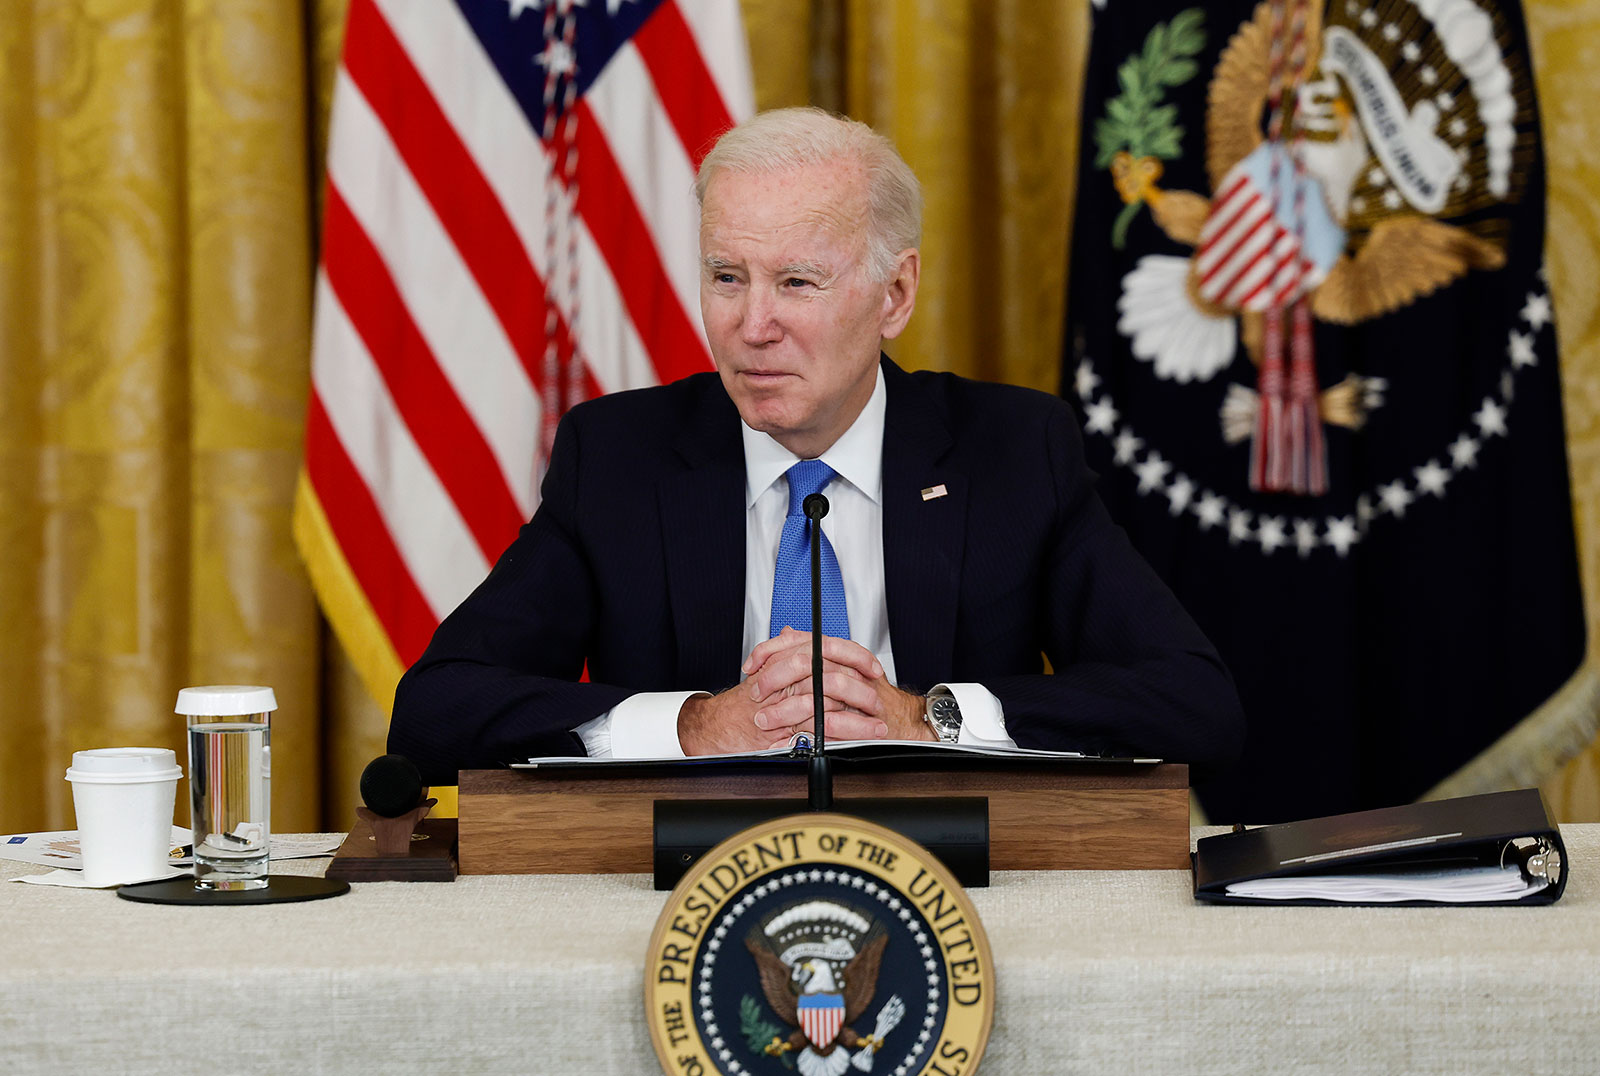 President Joe Biden gives remarks at the White House on Friday in Washington, DC.